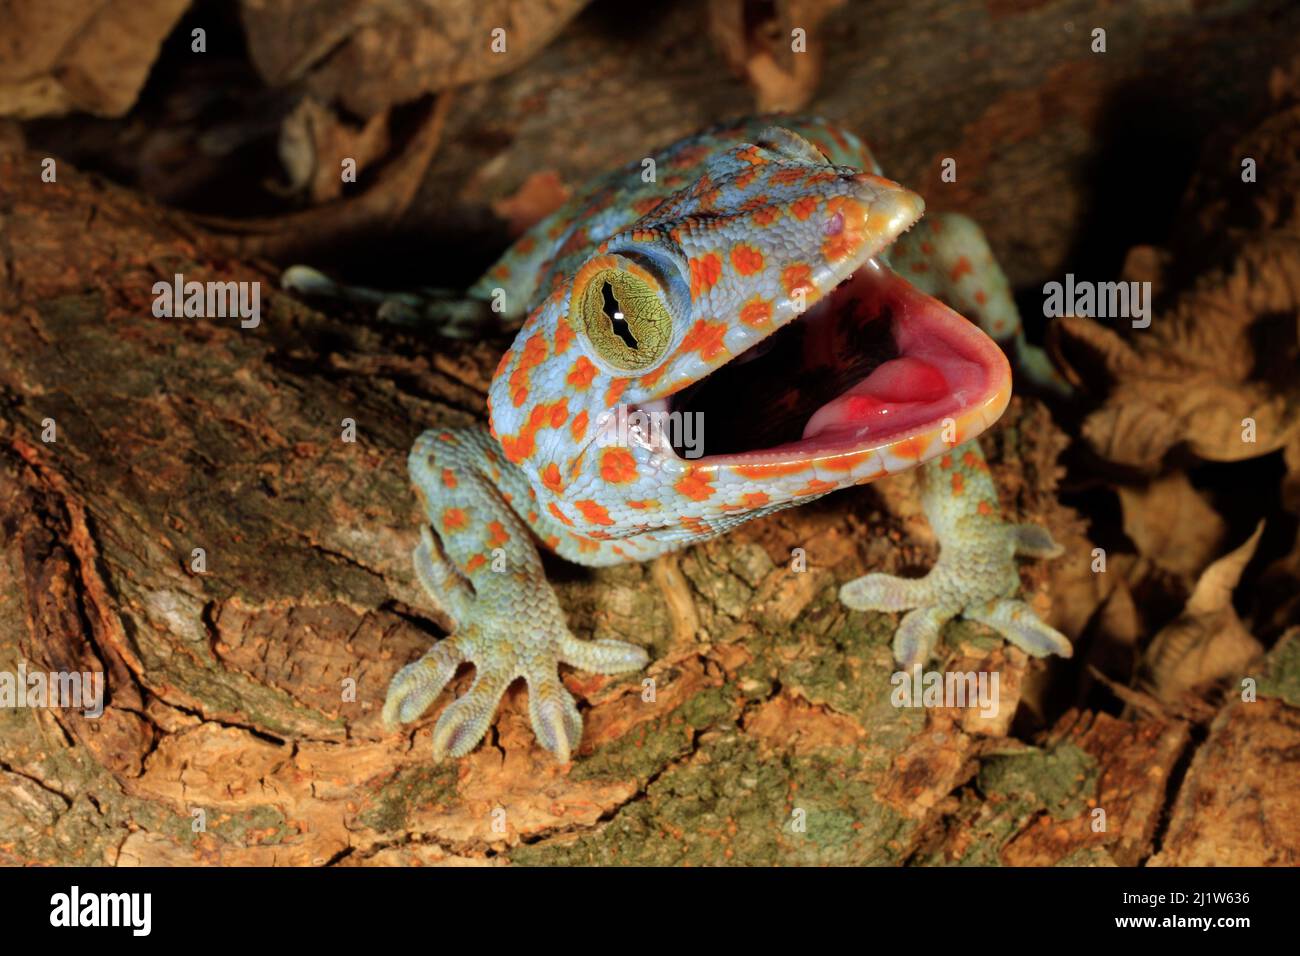 Tokay gecko (Gekko gecko) enacting a defensive display towards a perceived threat, Phuket Island, Thailand, March. Controlled conditions. Stock Photo